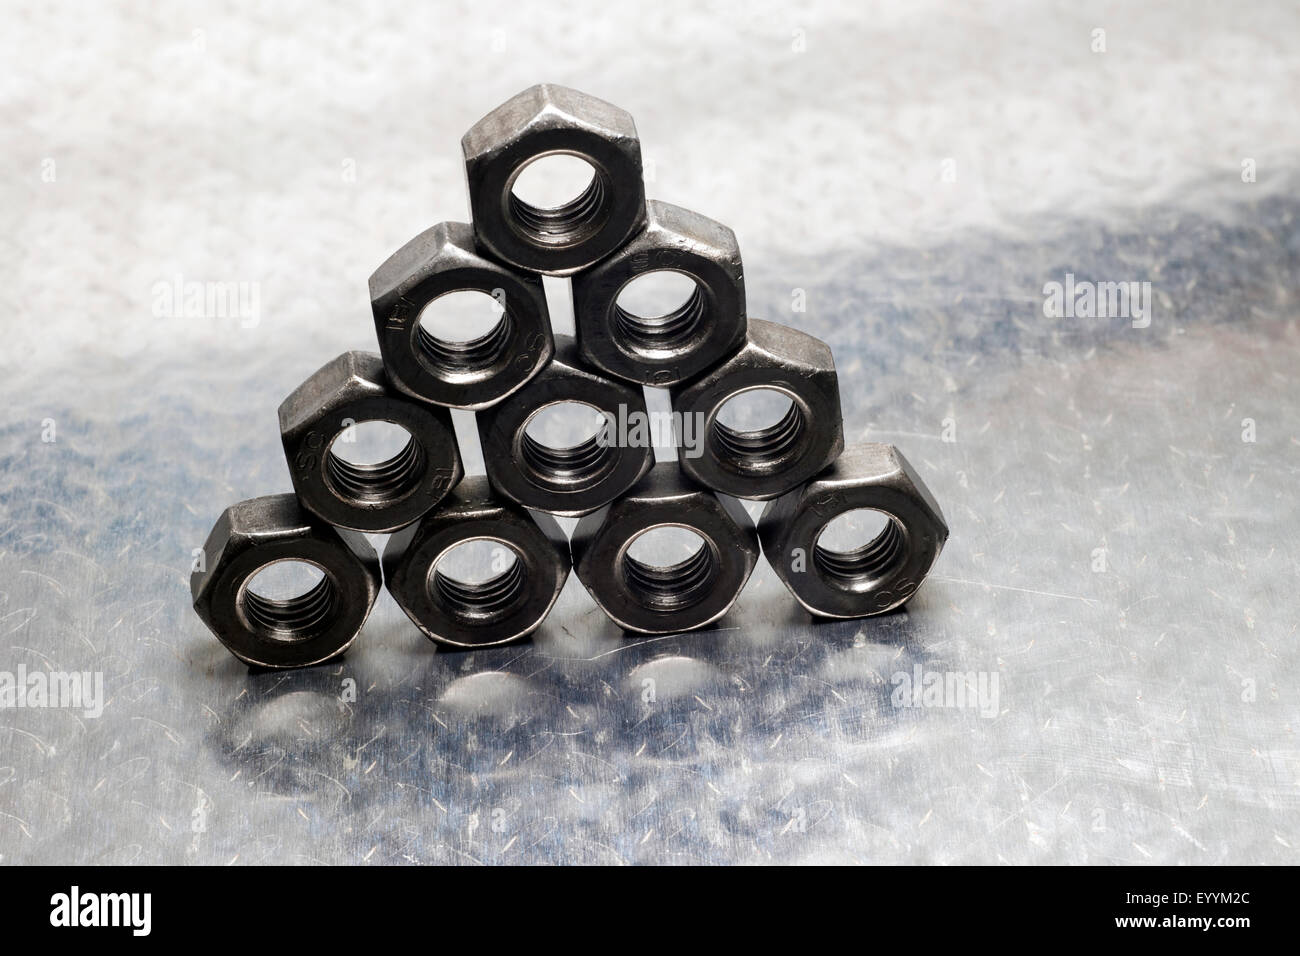 Steel metric nuts formed into a pyramid shape. Stock Photo